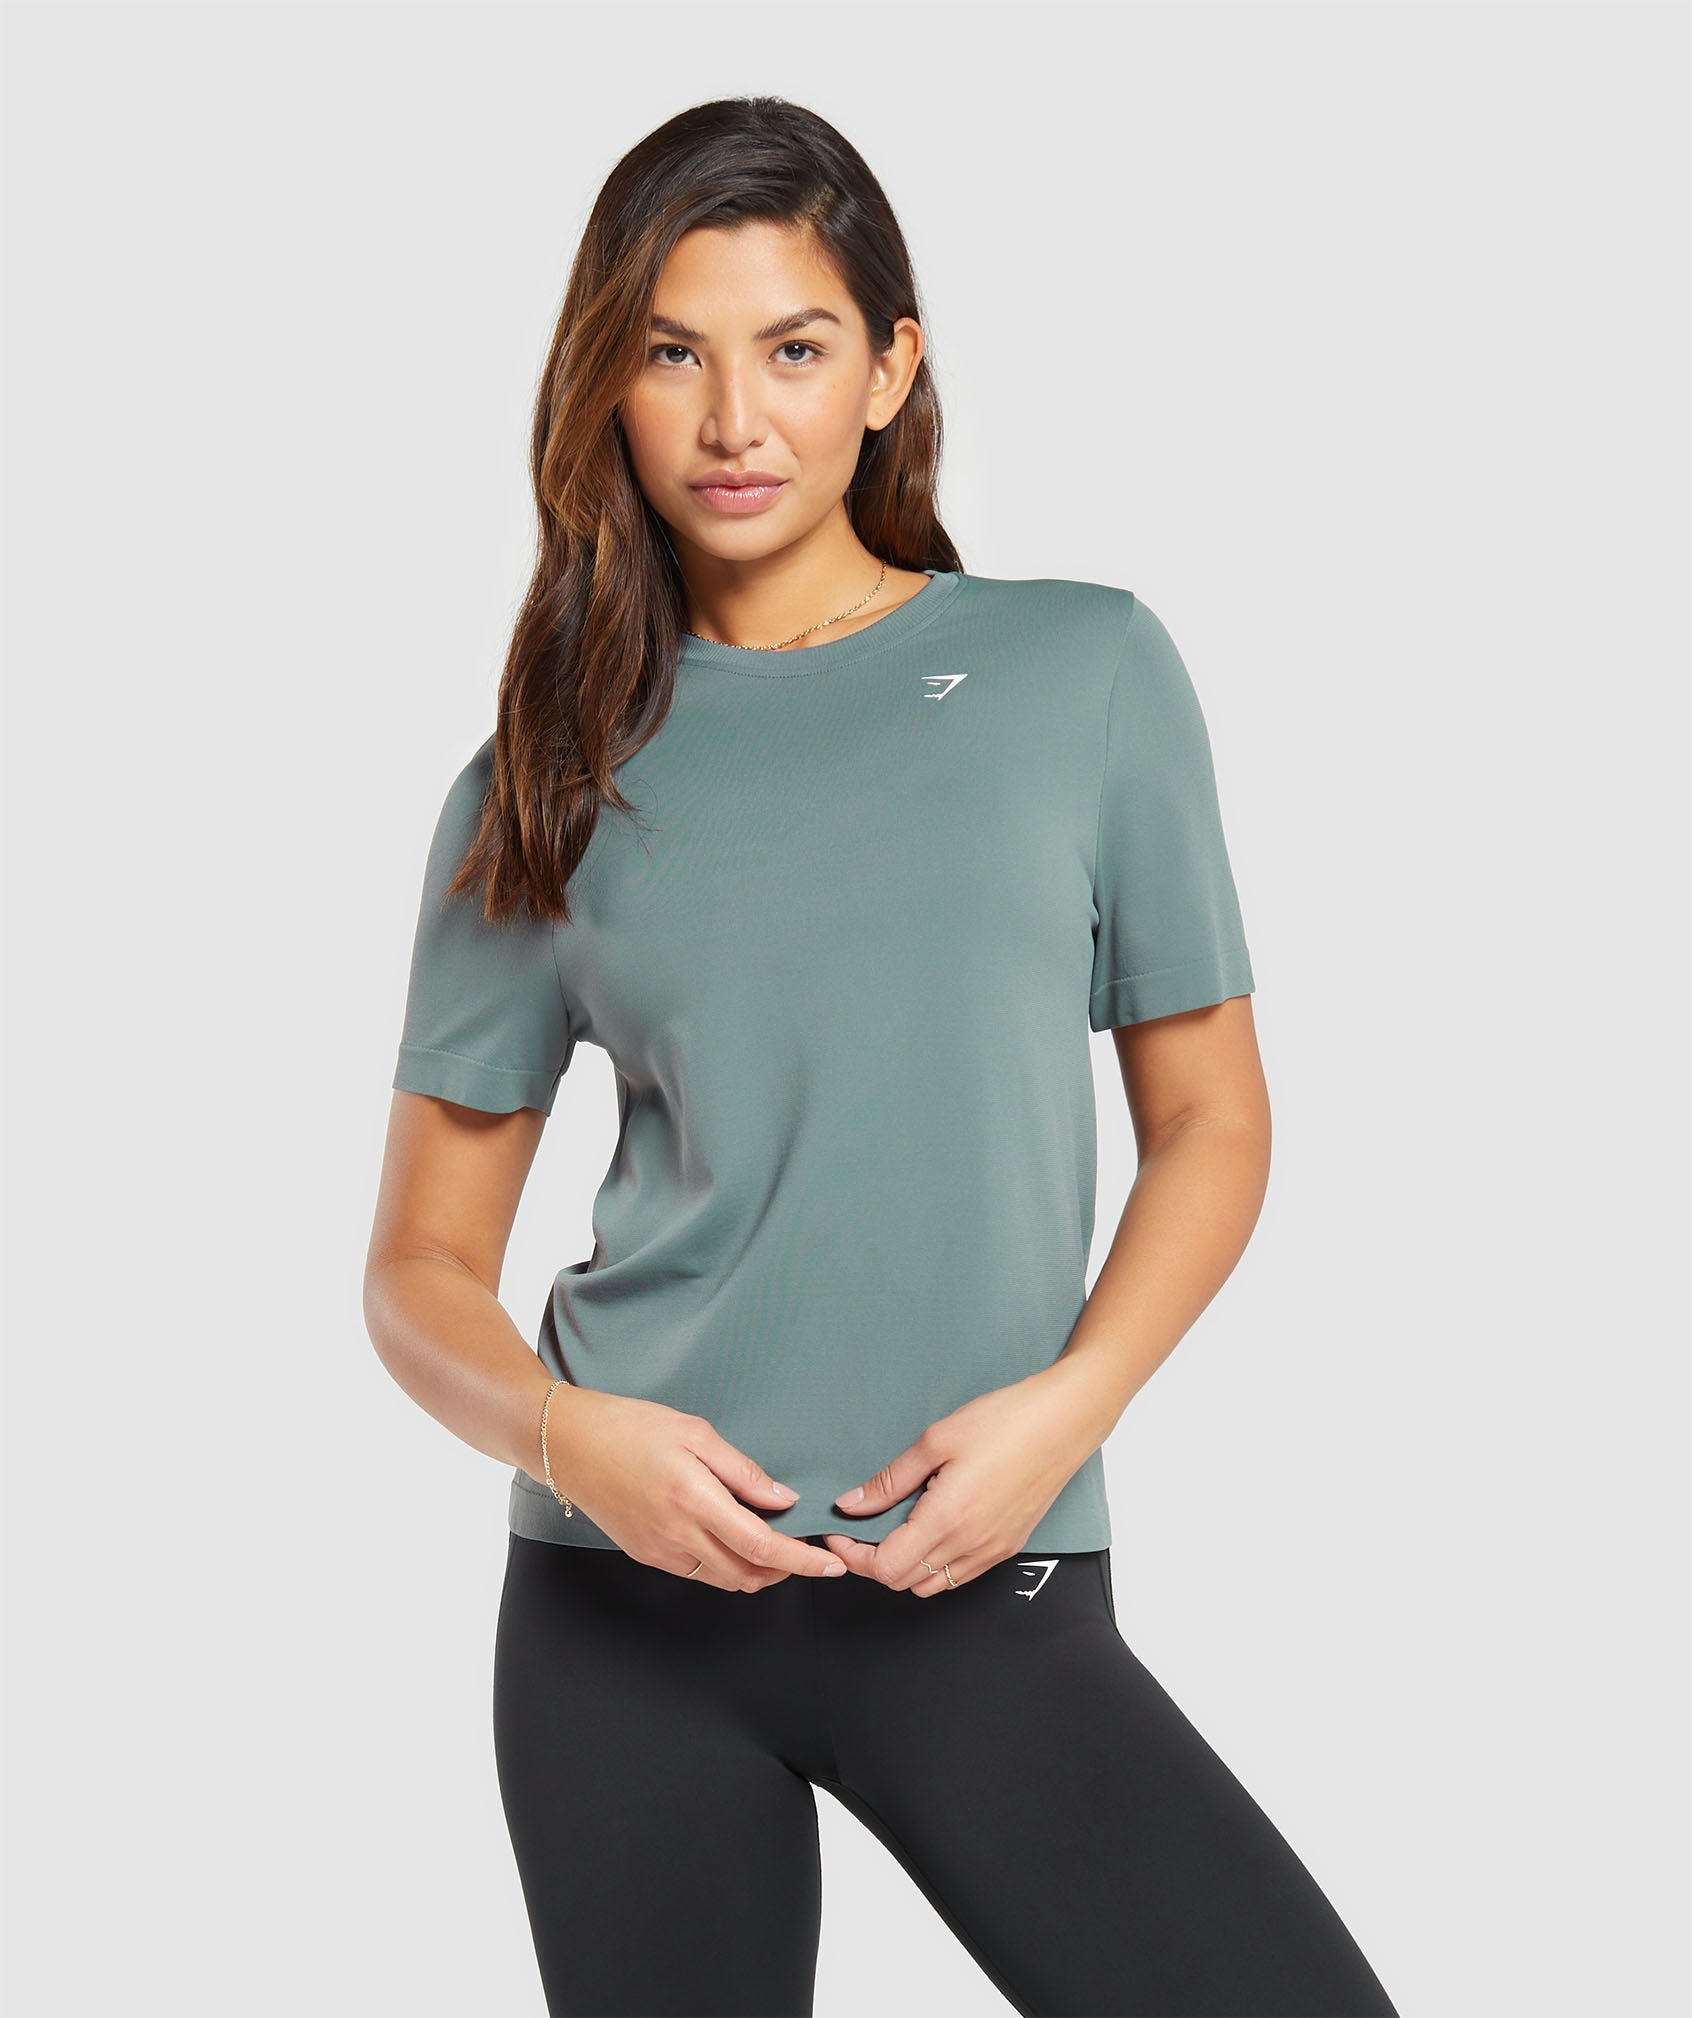 Everyday Seamless T-Shirt in Cargo Teal